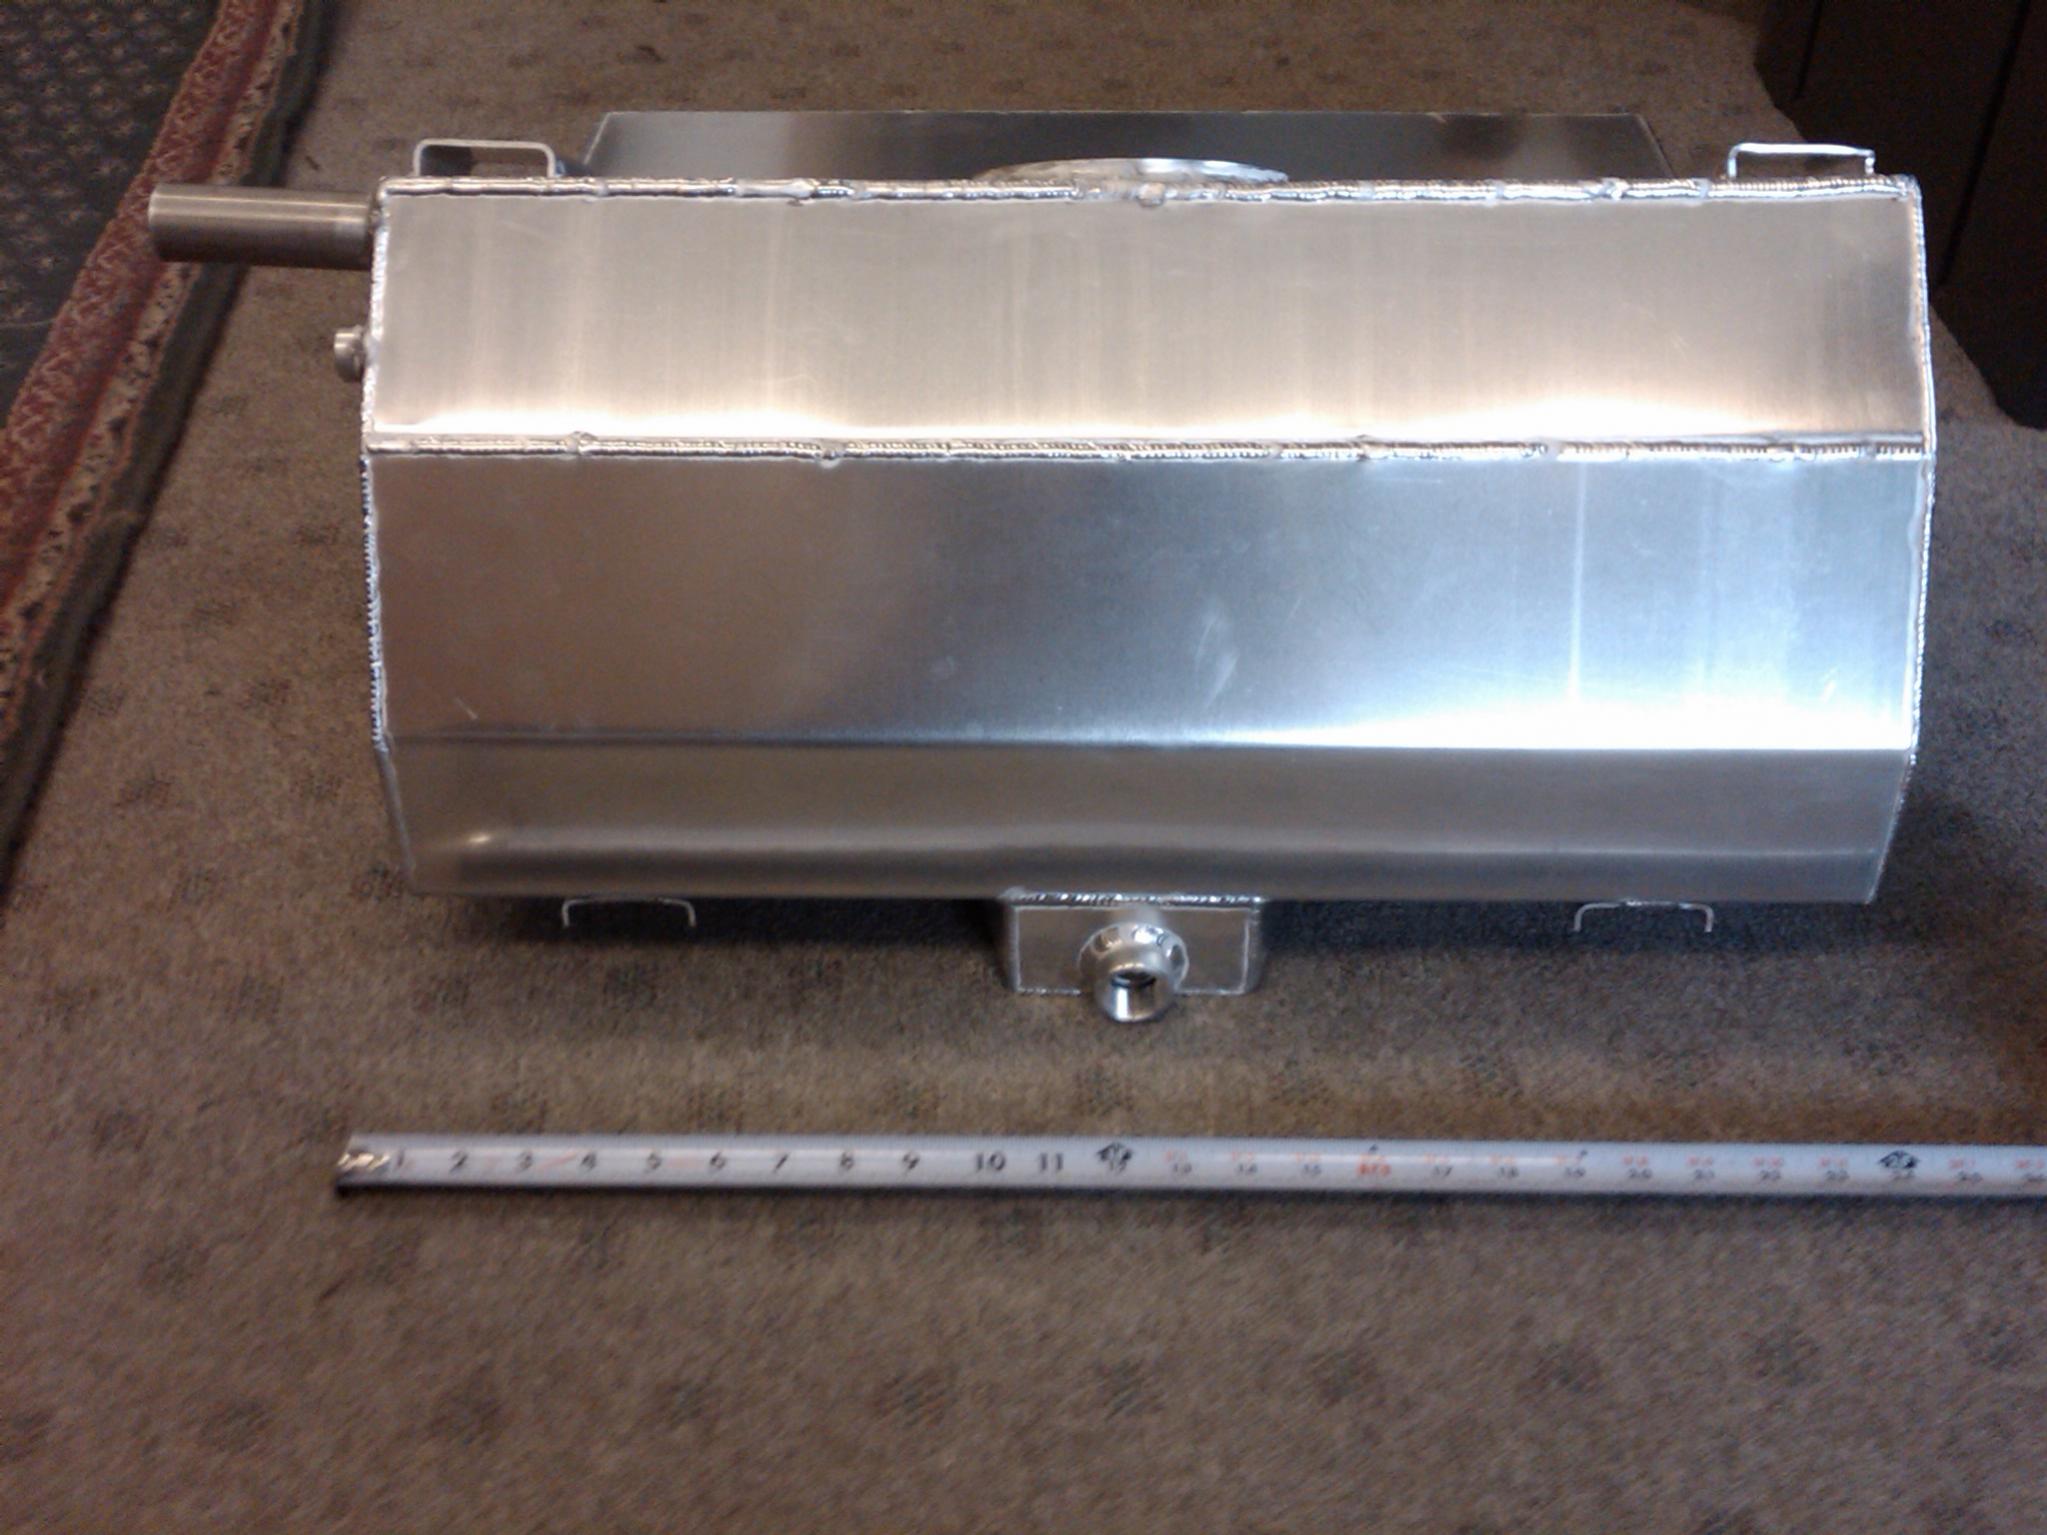 F-body Fuel tank. Fits 3rd and 4th gen. Aluminum tank. great deal